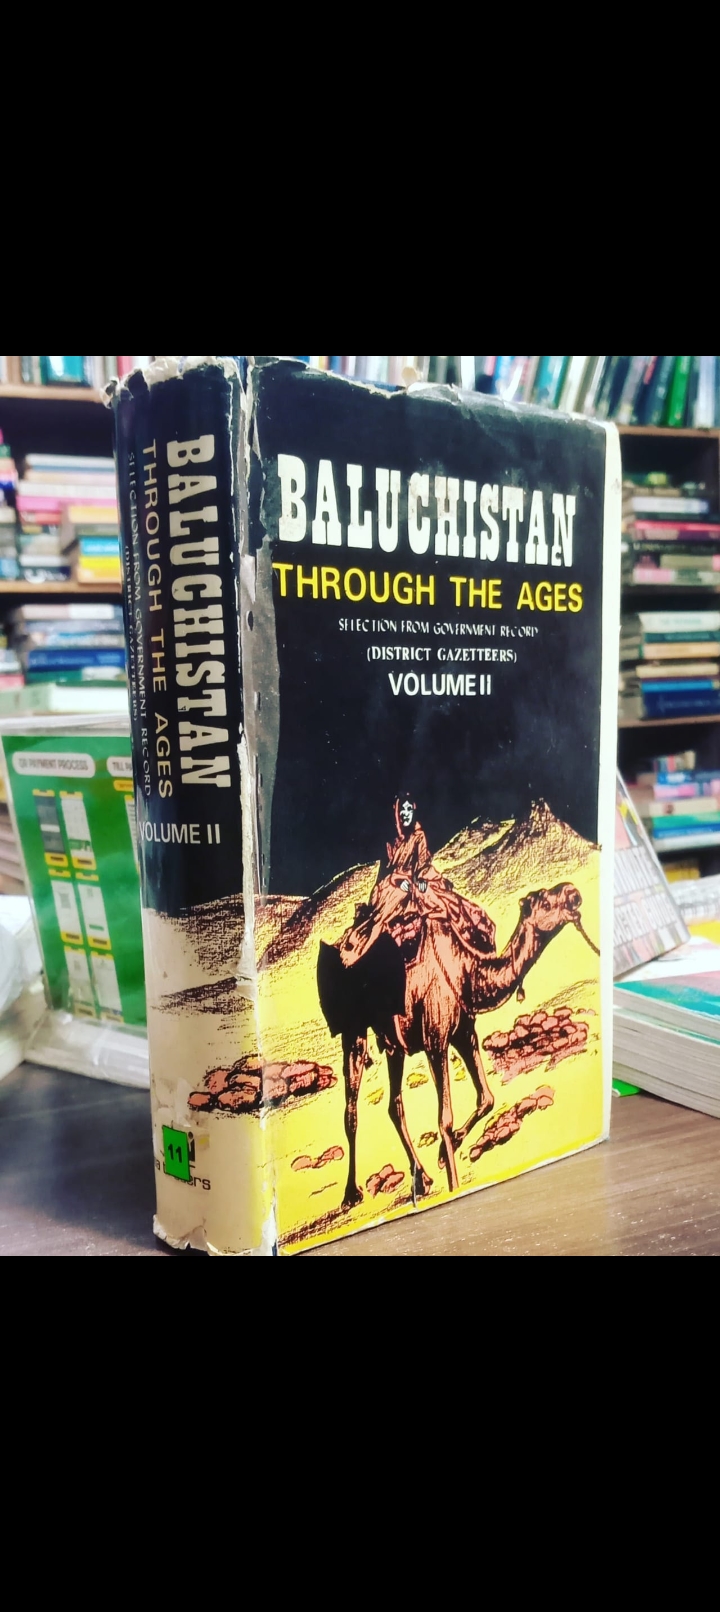 baluchistan through the ages. selection from govt record (district gazetteers) volume 2. original ha